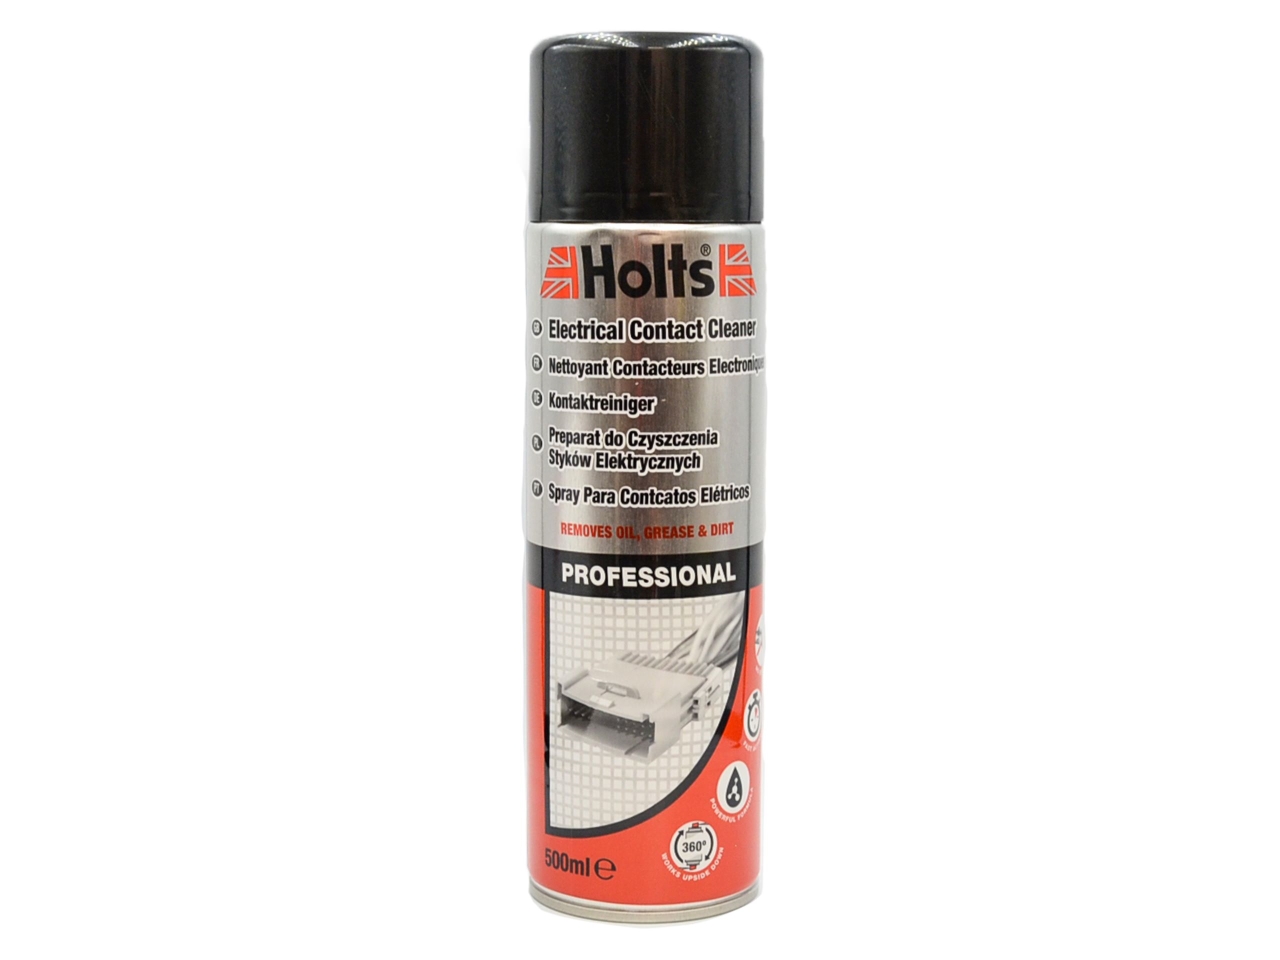 Holts Electrical Contact Cleaner 500ml